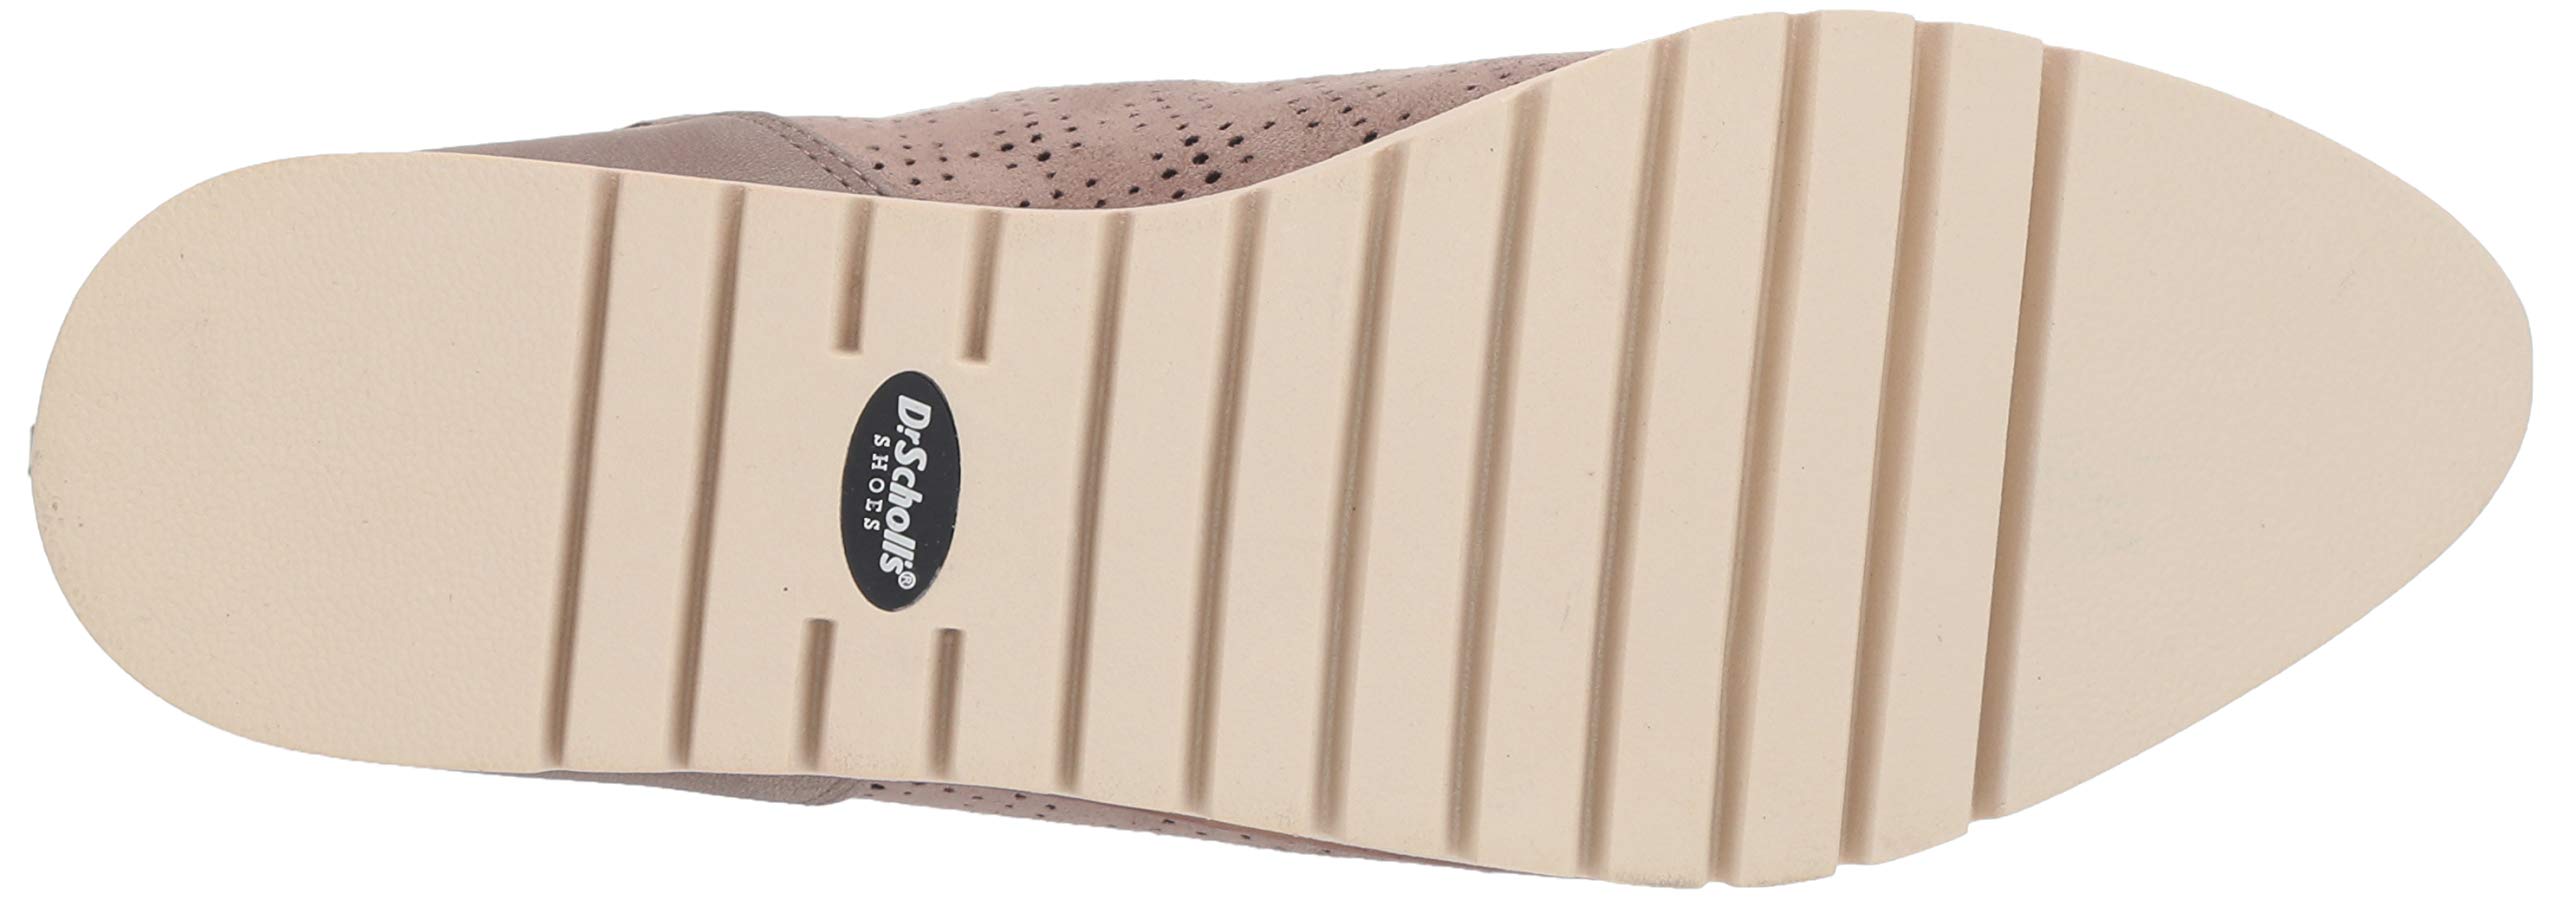 Dr. Scholl's Shoes Women's Insane Loafer